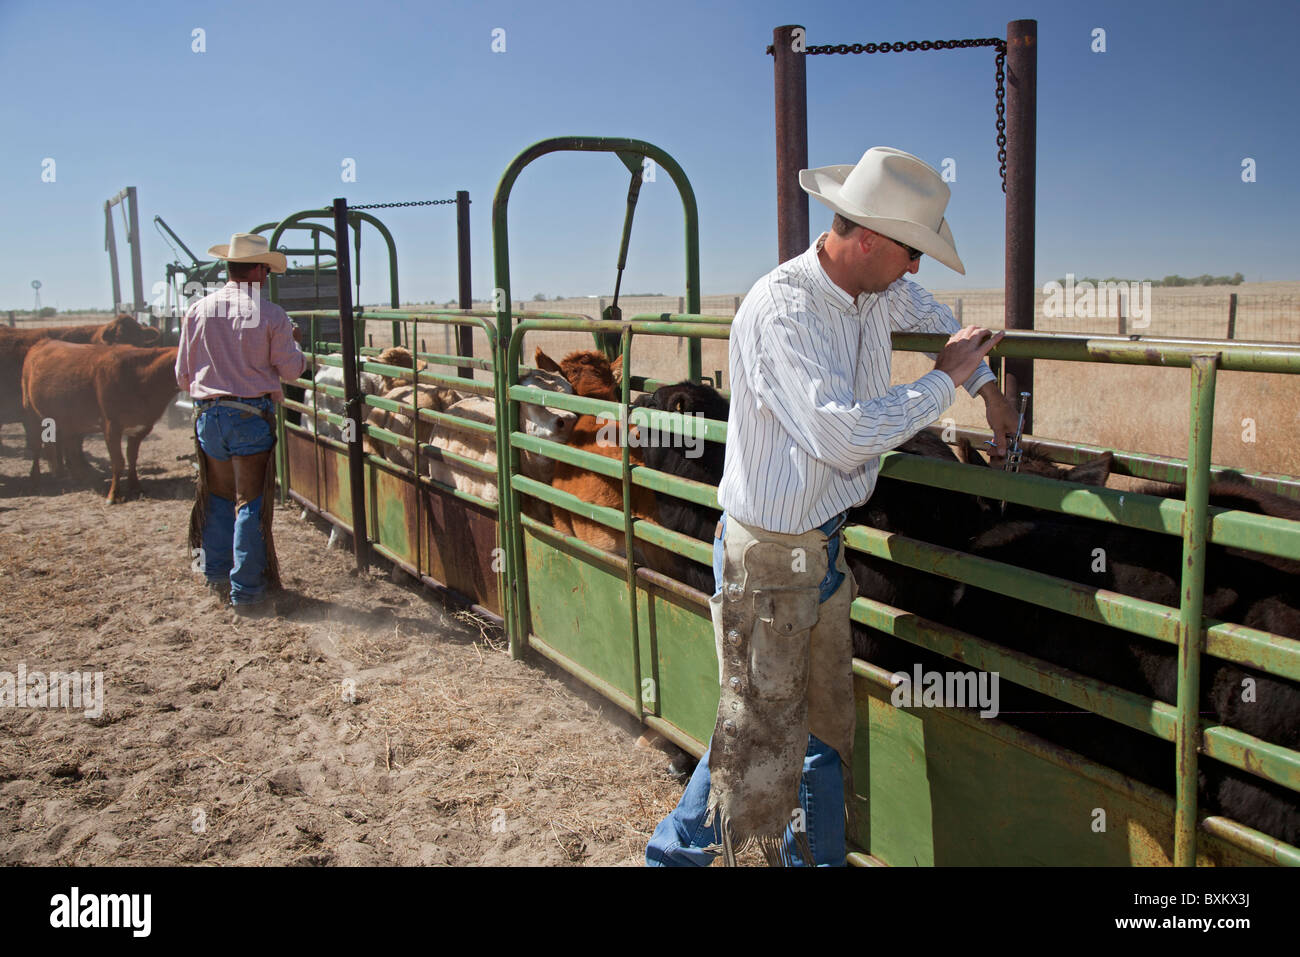 Calf Vaccination on Cattle Ranch Stock Photo